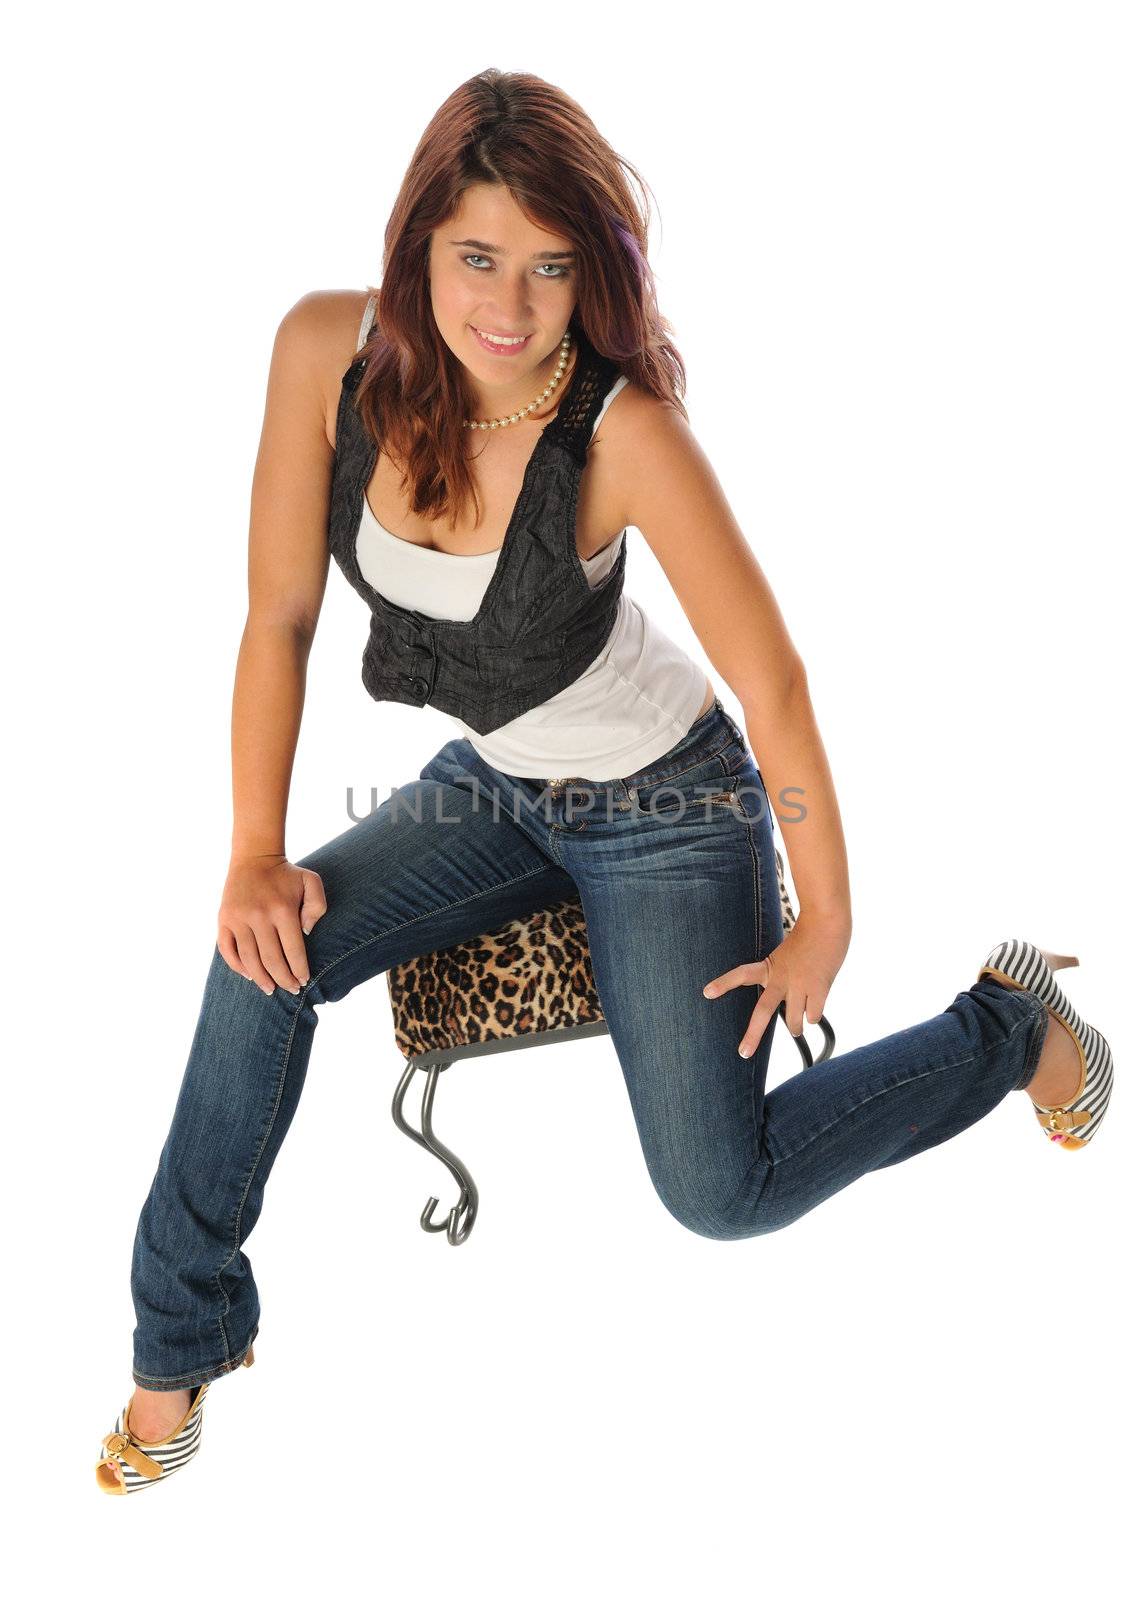 attractive young woman on a stool set on a white background